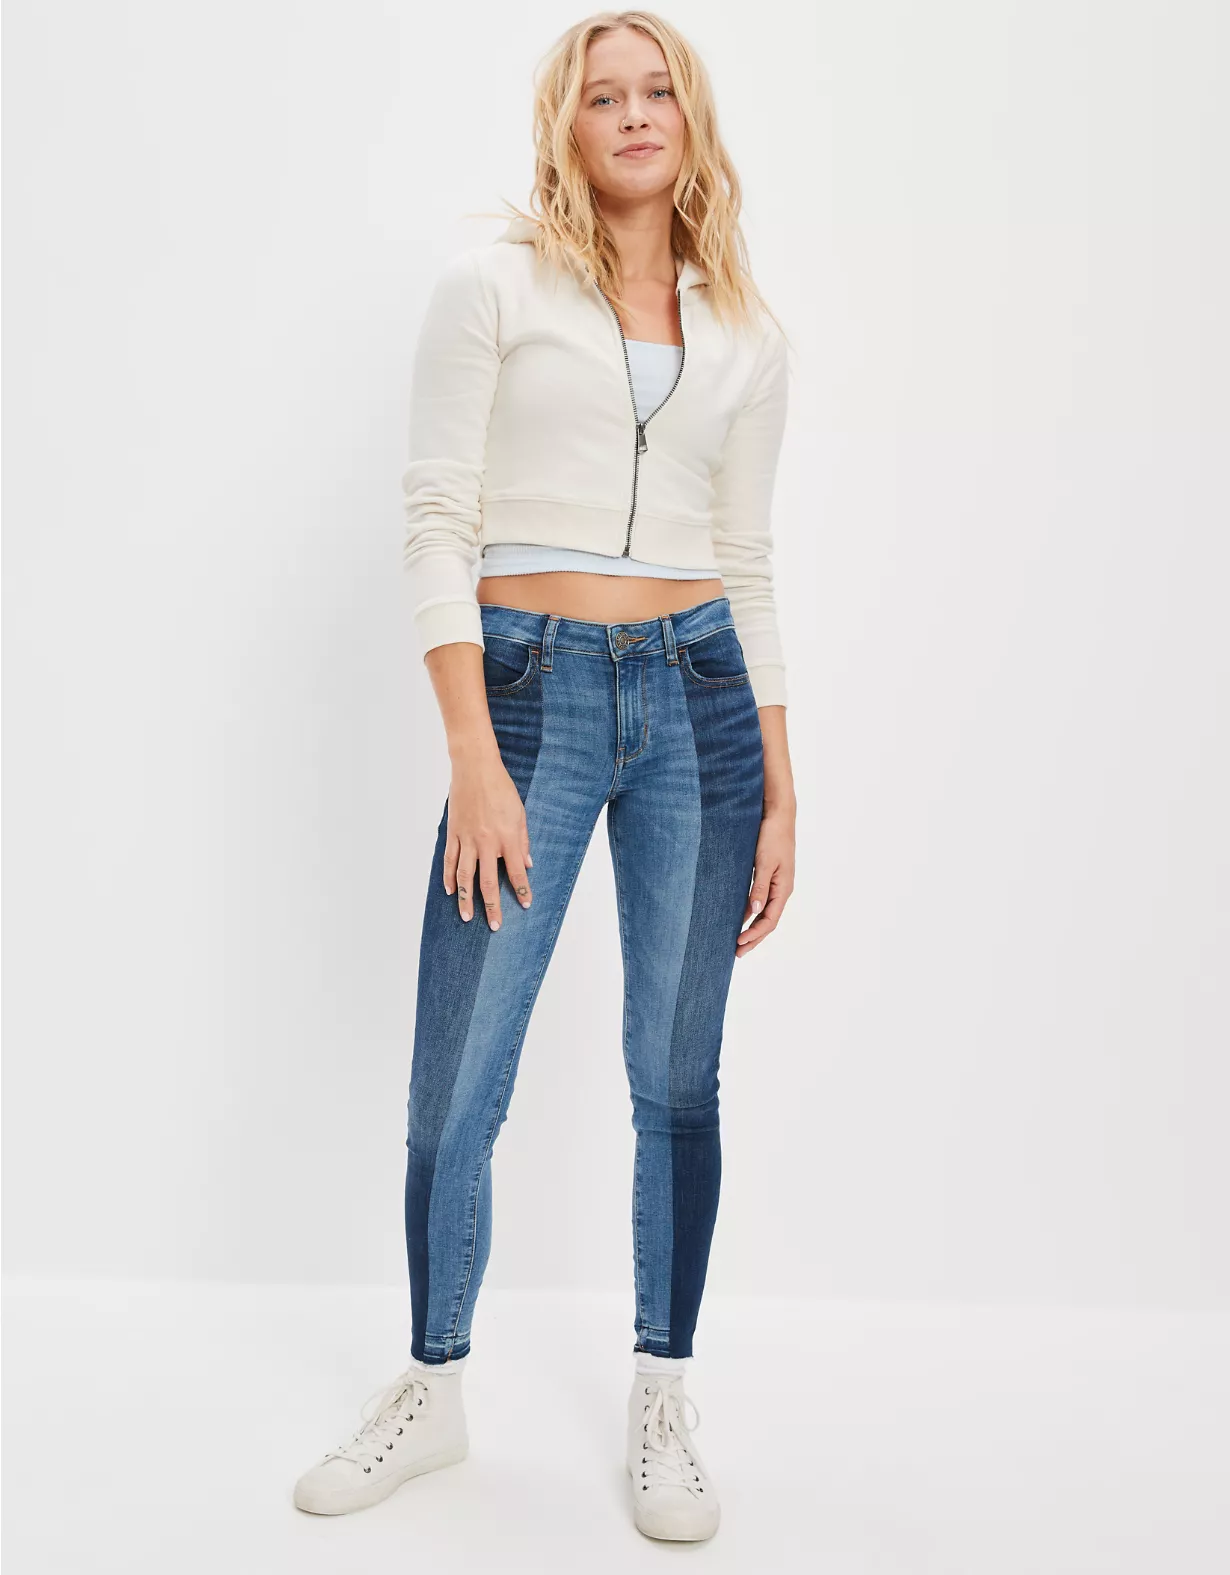 AE Real Good Repurposed High-Waisted Curvy Jegging